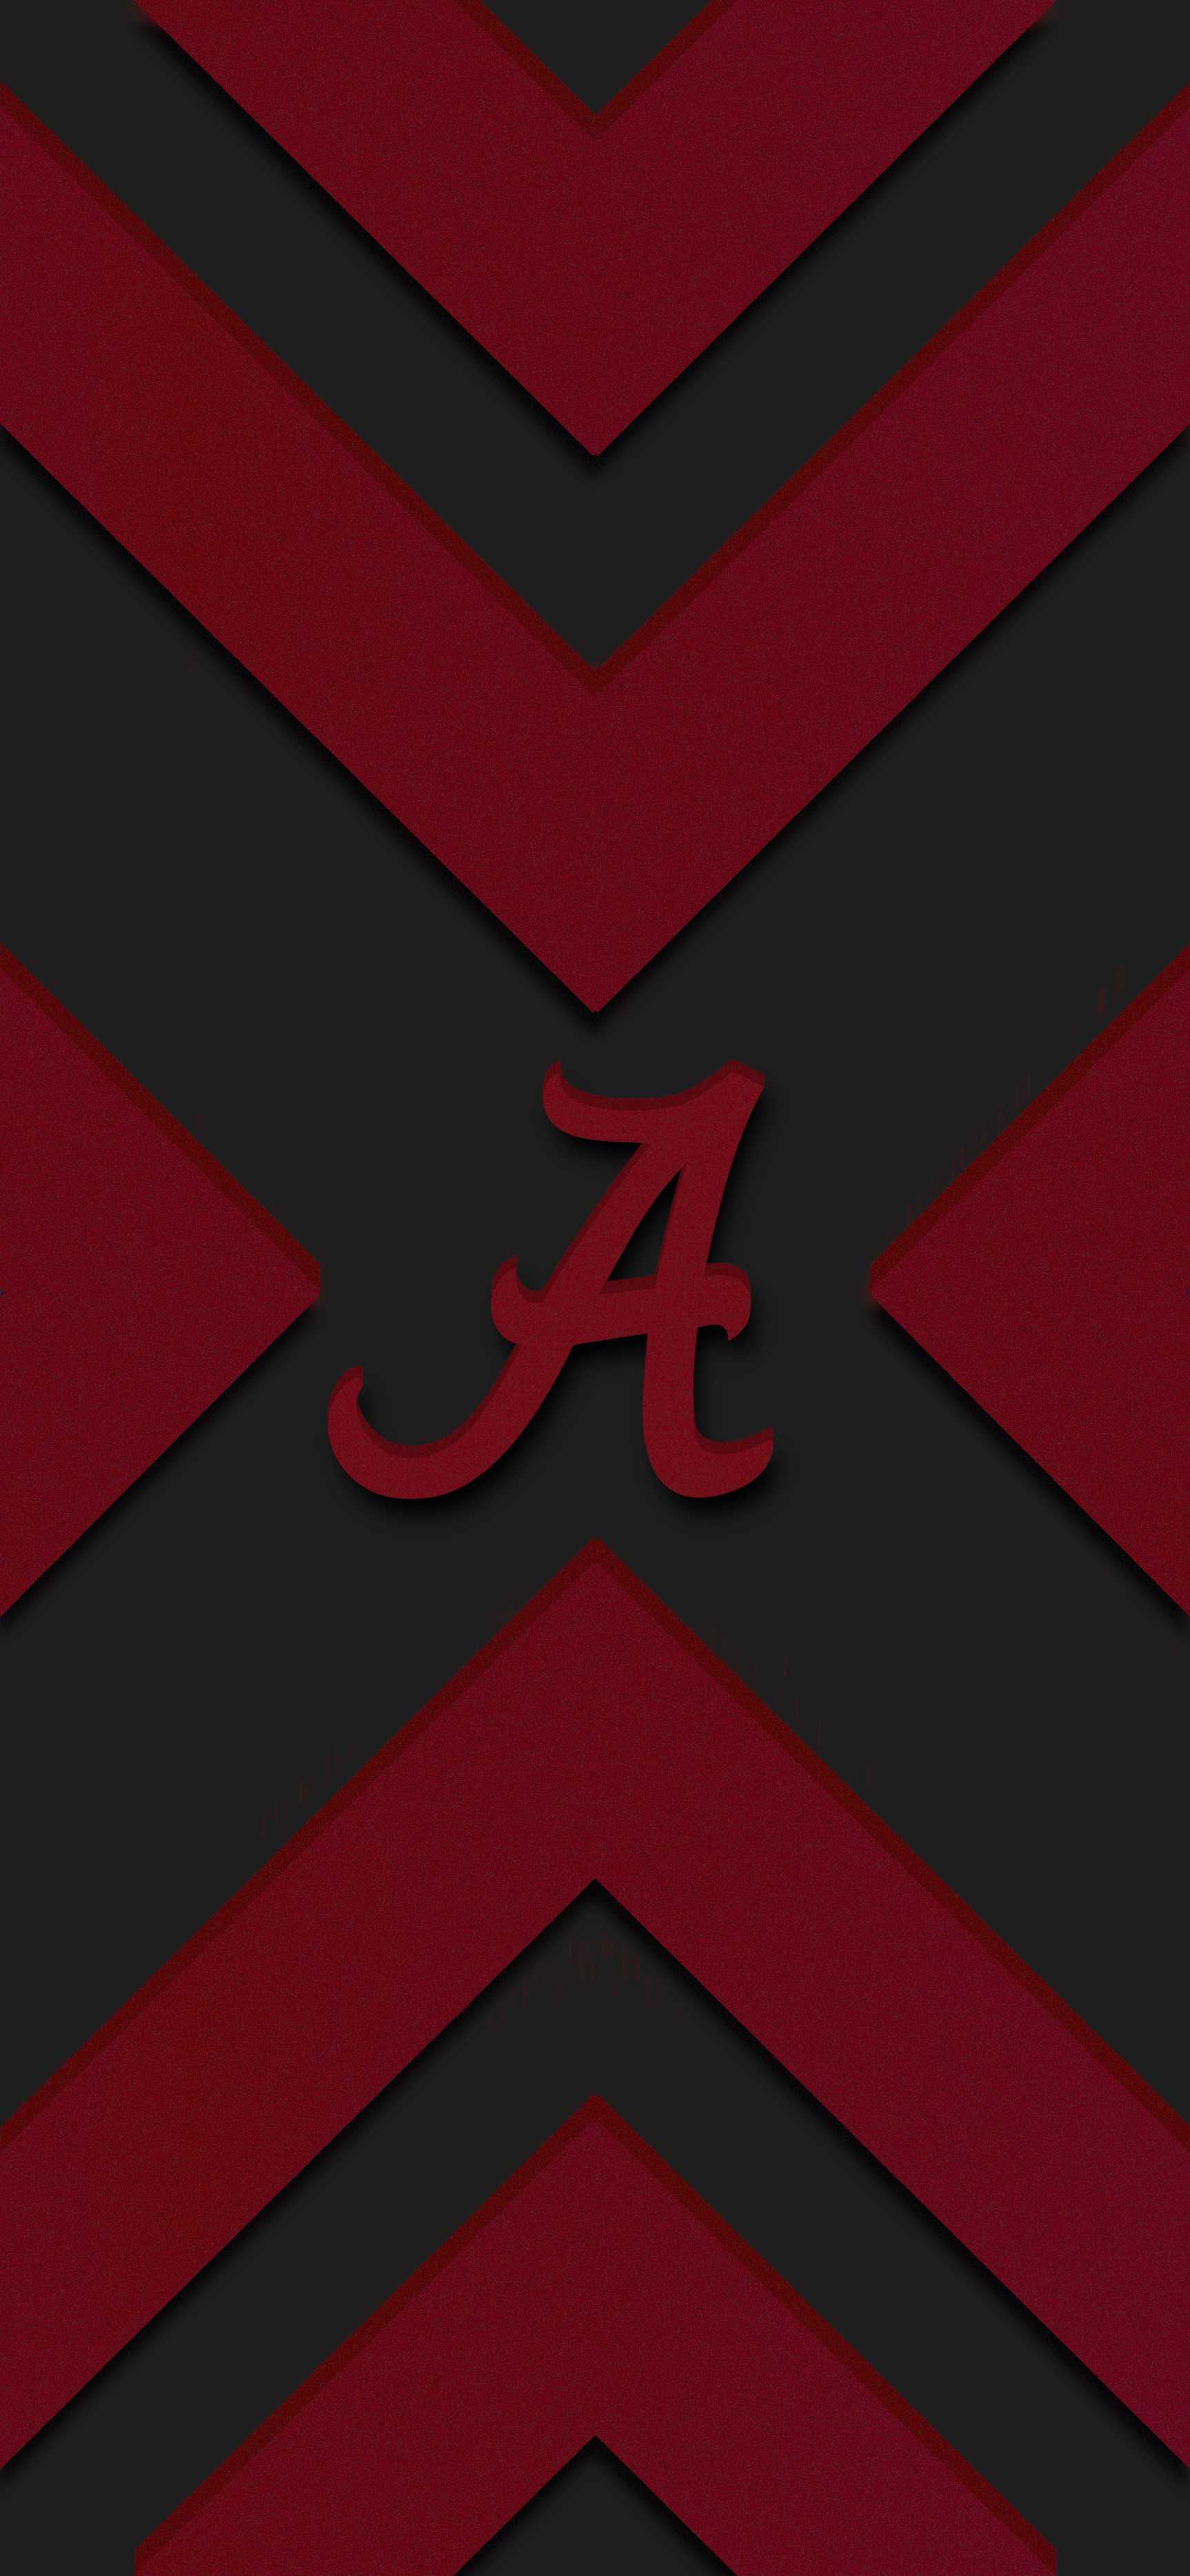 Alabama Wallpaper For IPhone 62 images